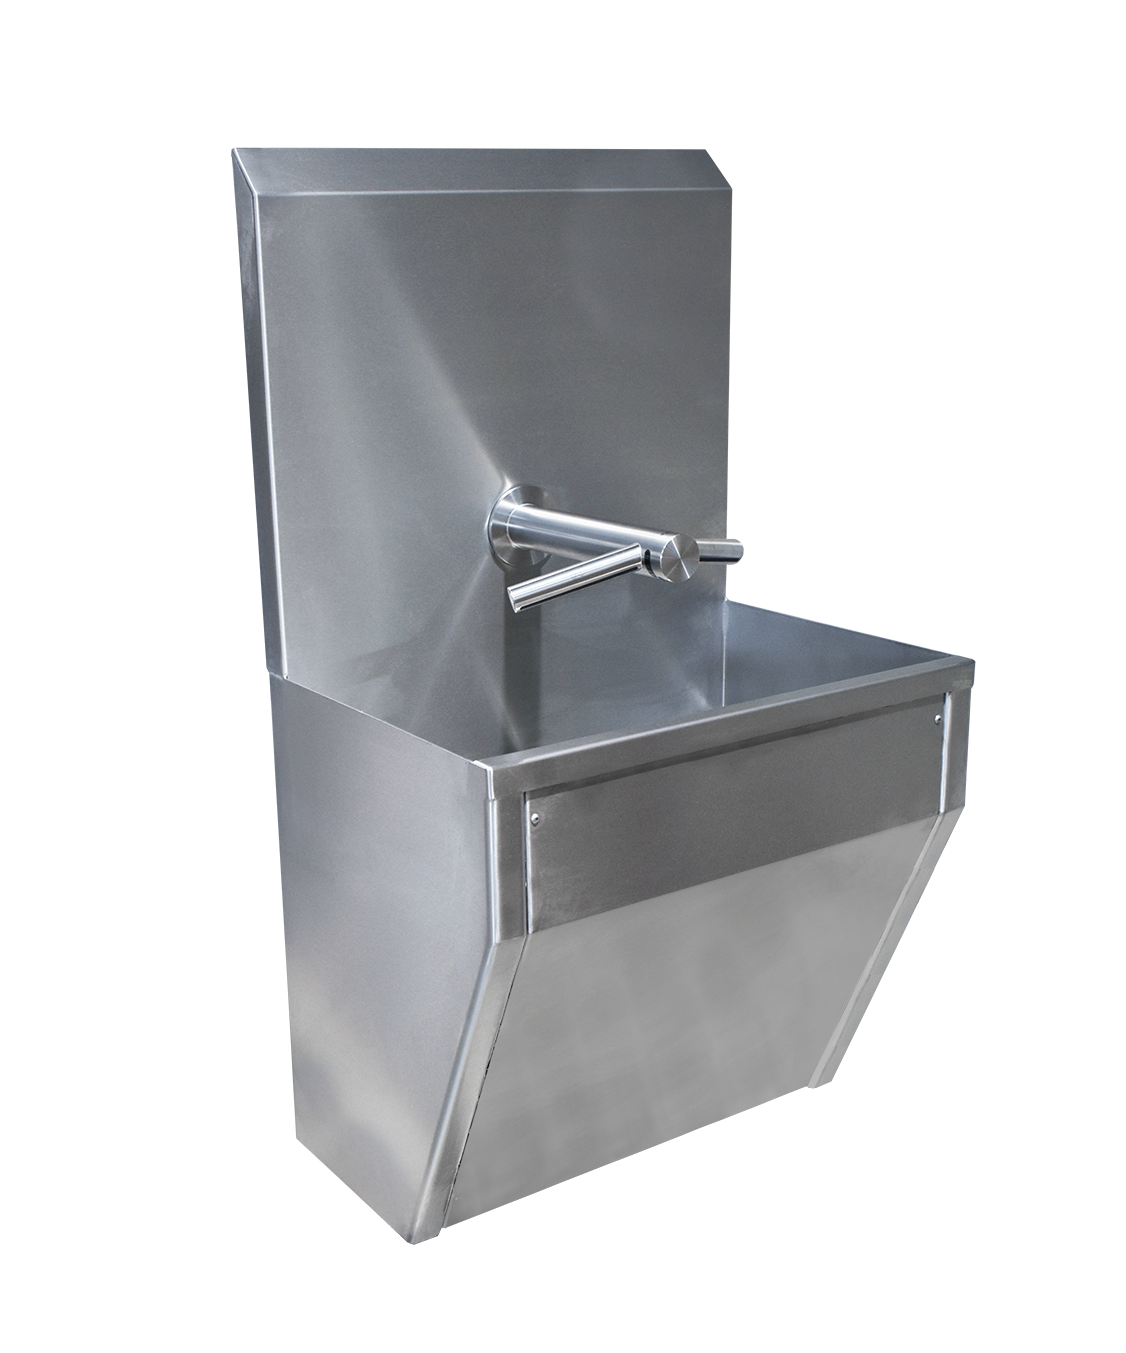 Stainless steel three station wash trough sink with dyson airblade wash + dry tap and skirt